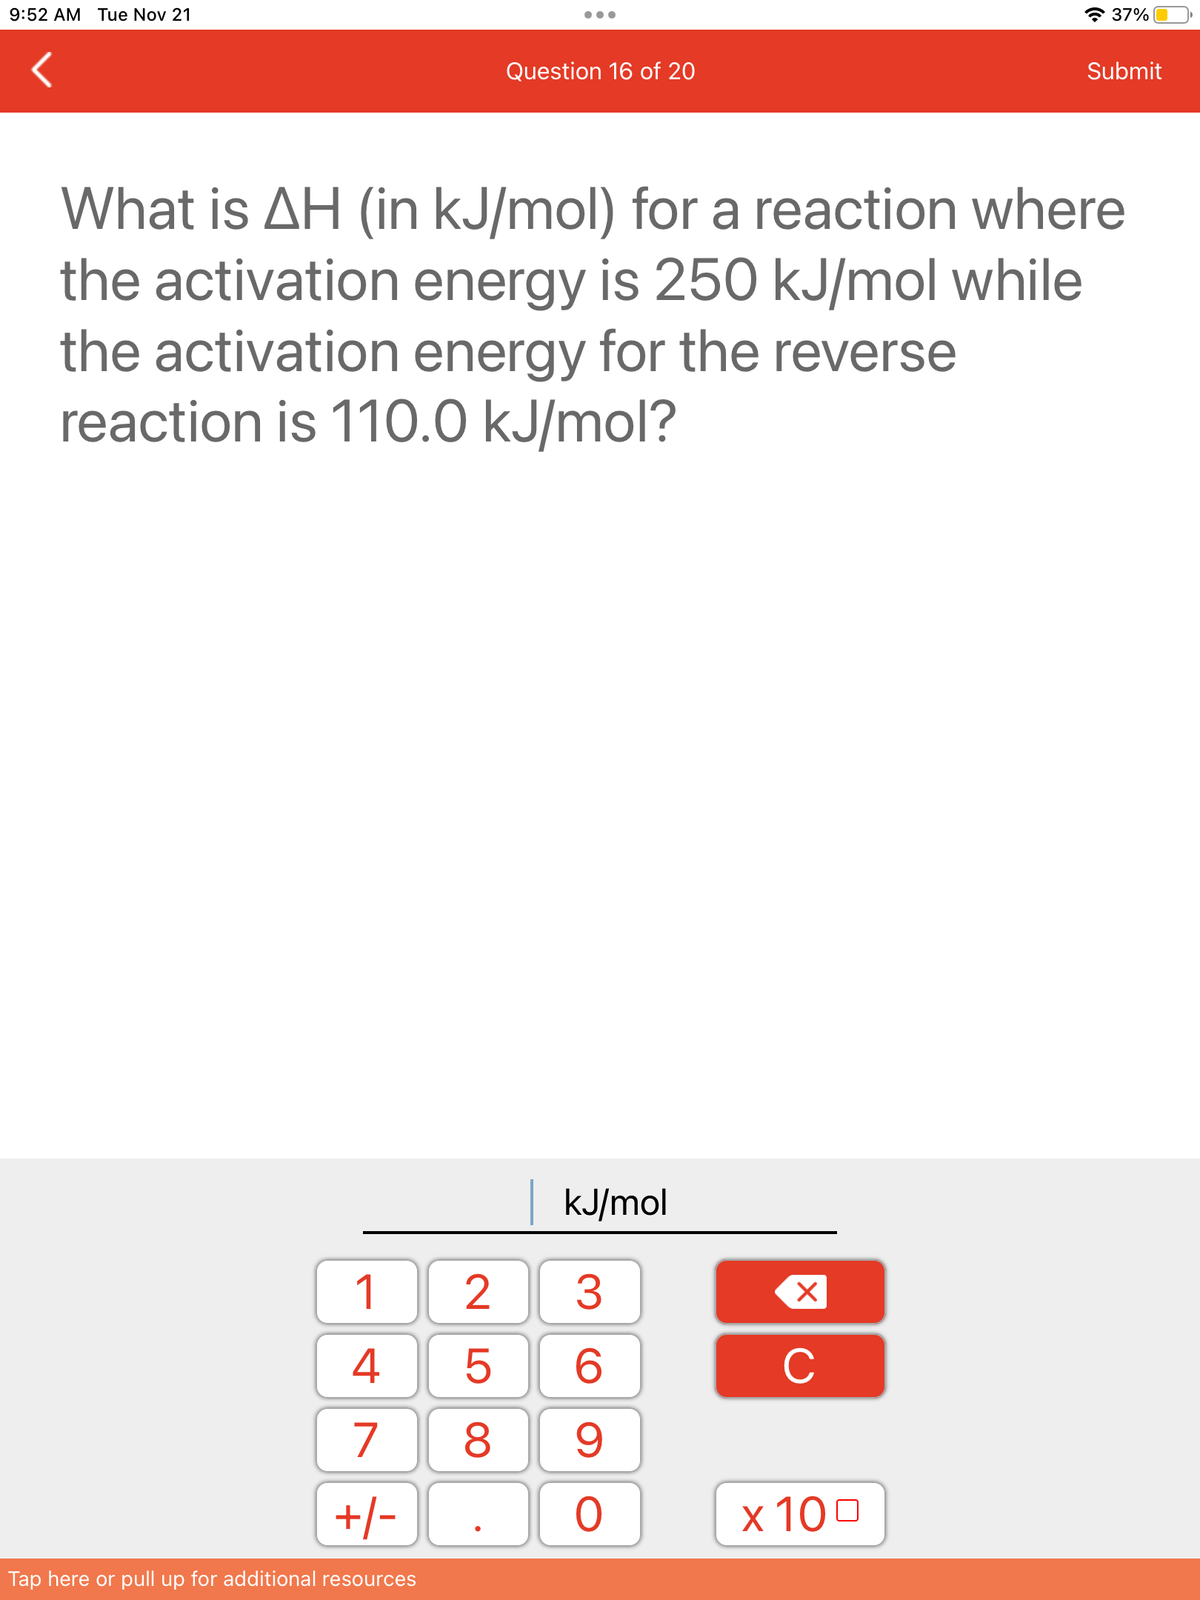 9:52 AM Tue Nov 21
1
4
7
+/-
Tap here or pull up for additional resources
Question 16 of 20
What is AH (in kJ/mol) for a reaction where
the activation energy is 250 kJ/mol while
the activation energy for the reverse
reaction is 110.0 kJ/mol?
kJ/mol
3
6
8 9
25
O
X
C
37%
x 100
Submit